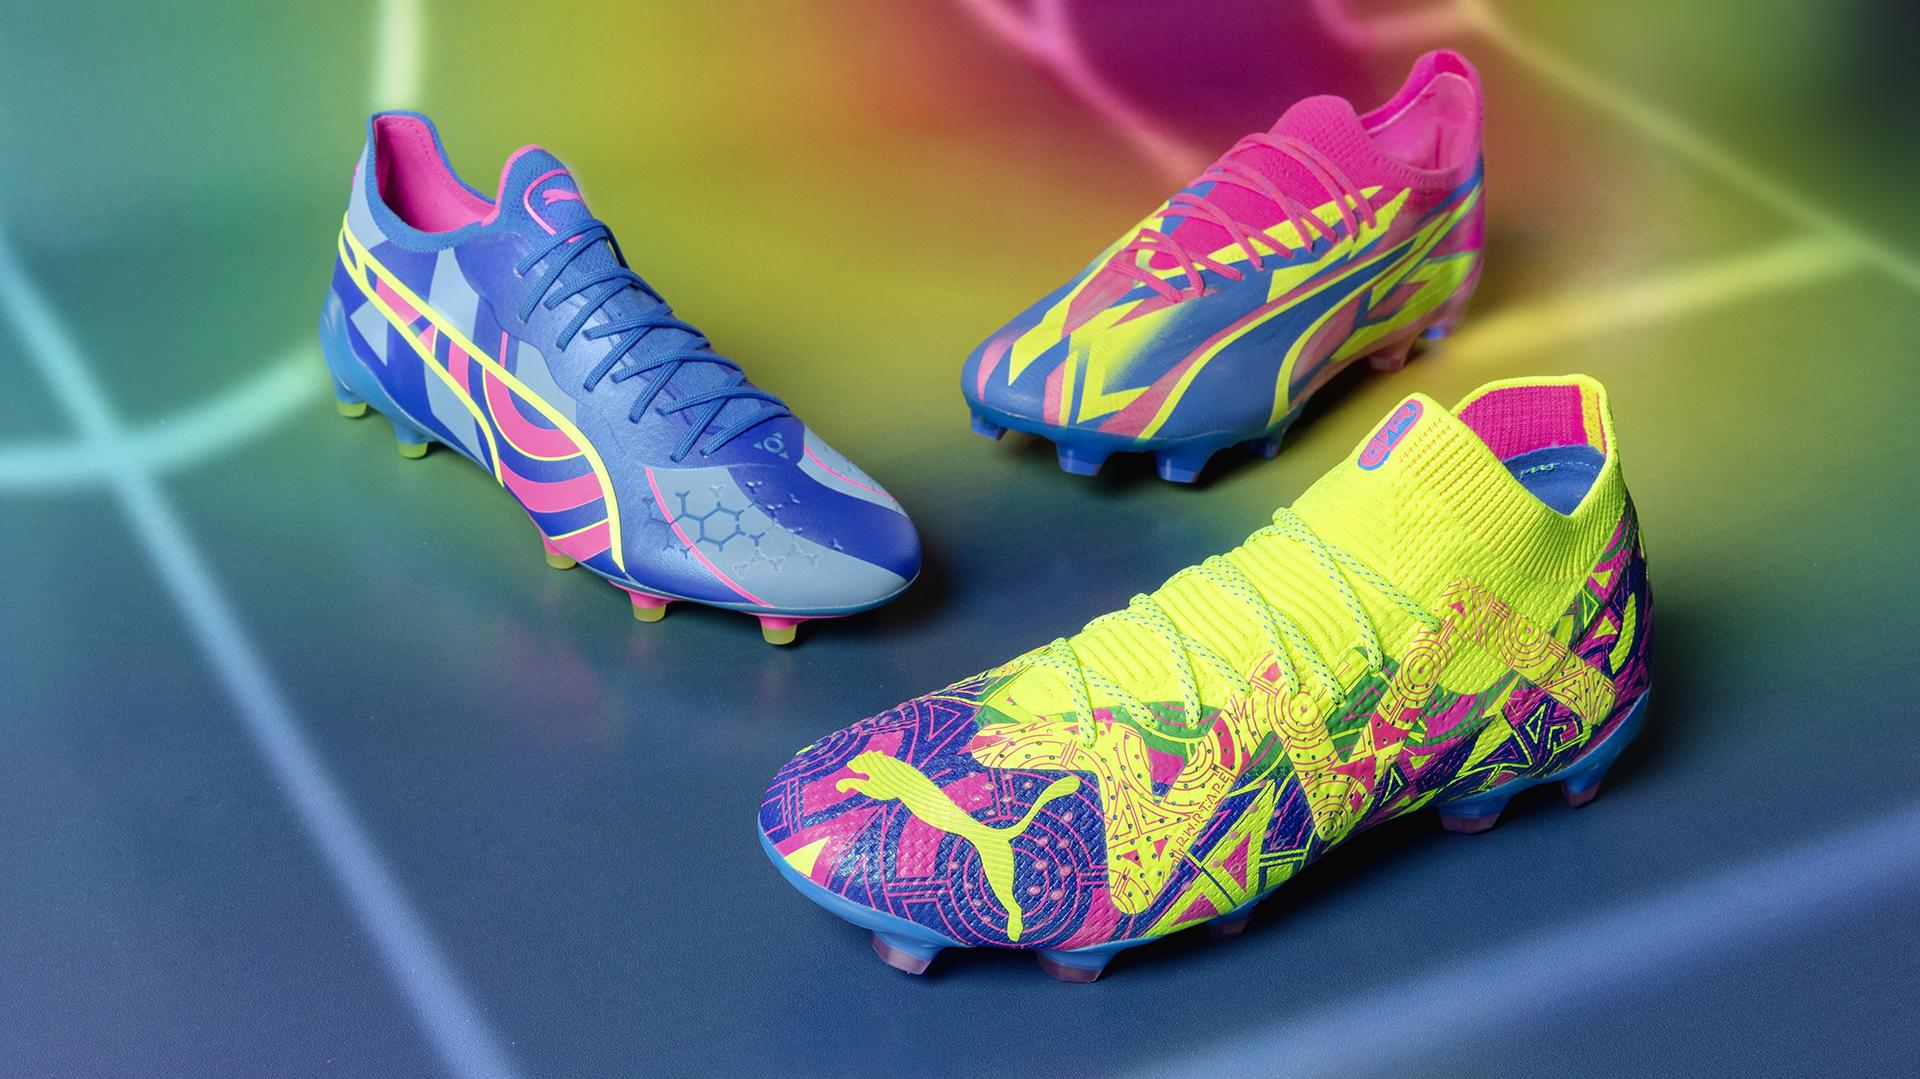 Puma S New Energy Boot Pack Is For The Next Generation